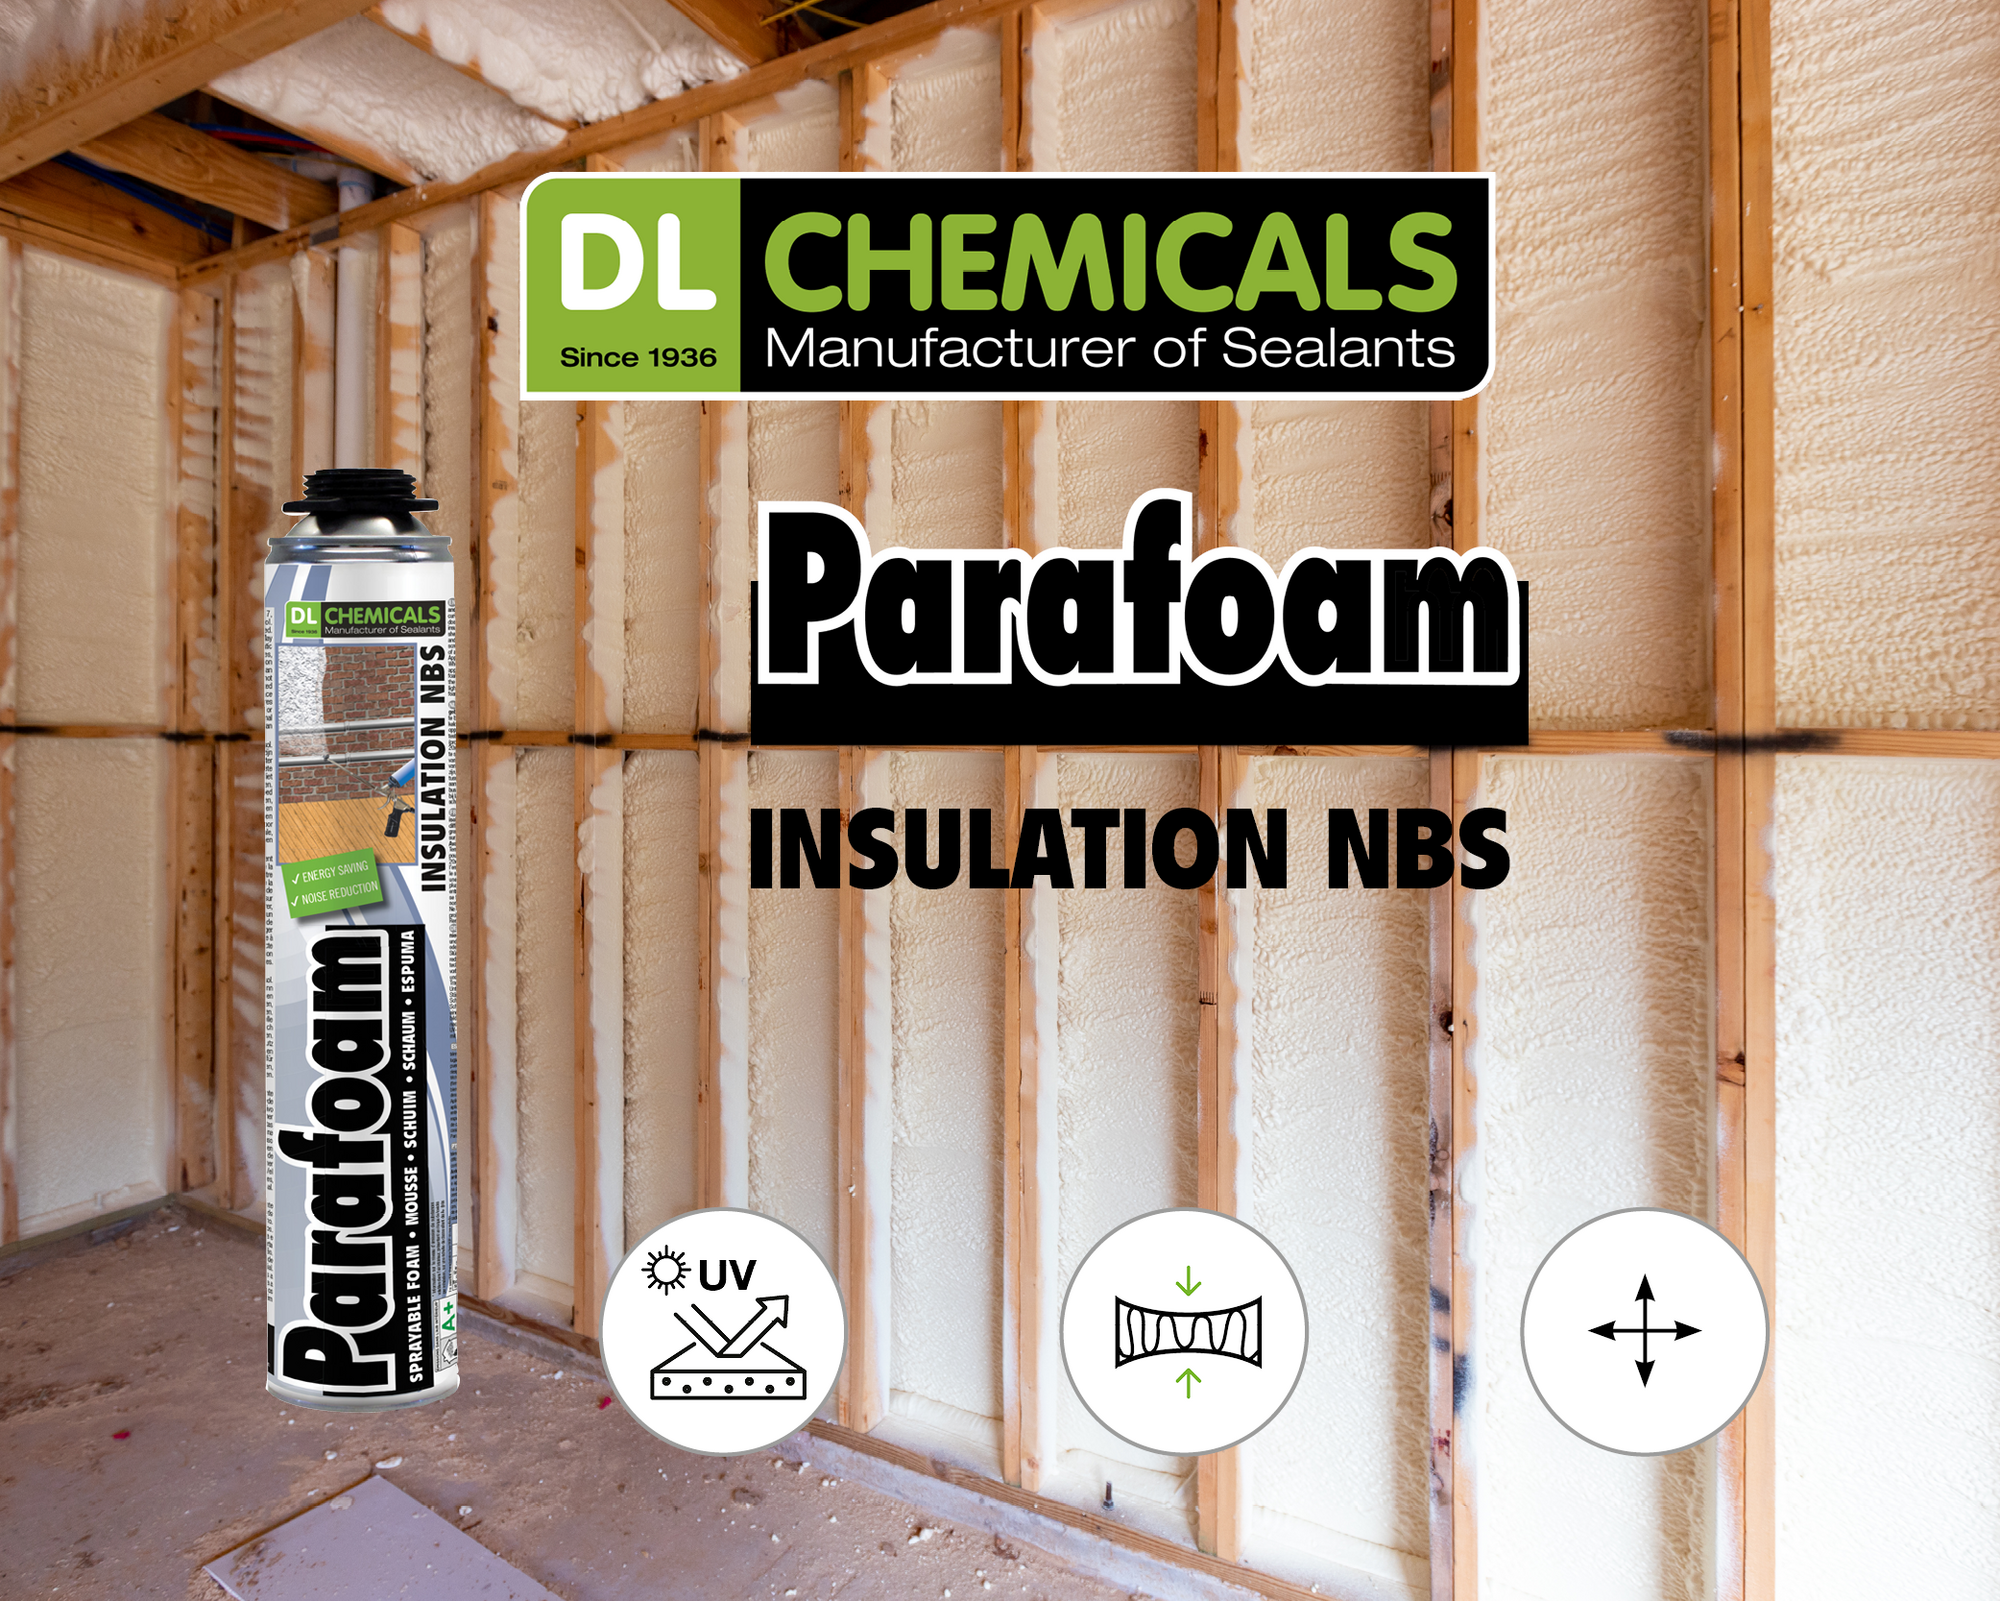 Easy, consistent and fast insulating with Parafoam Insulation NBS